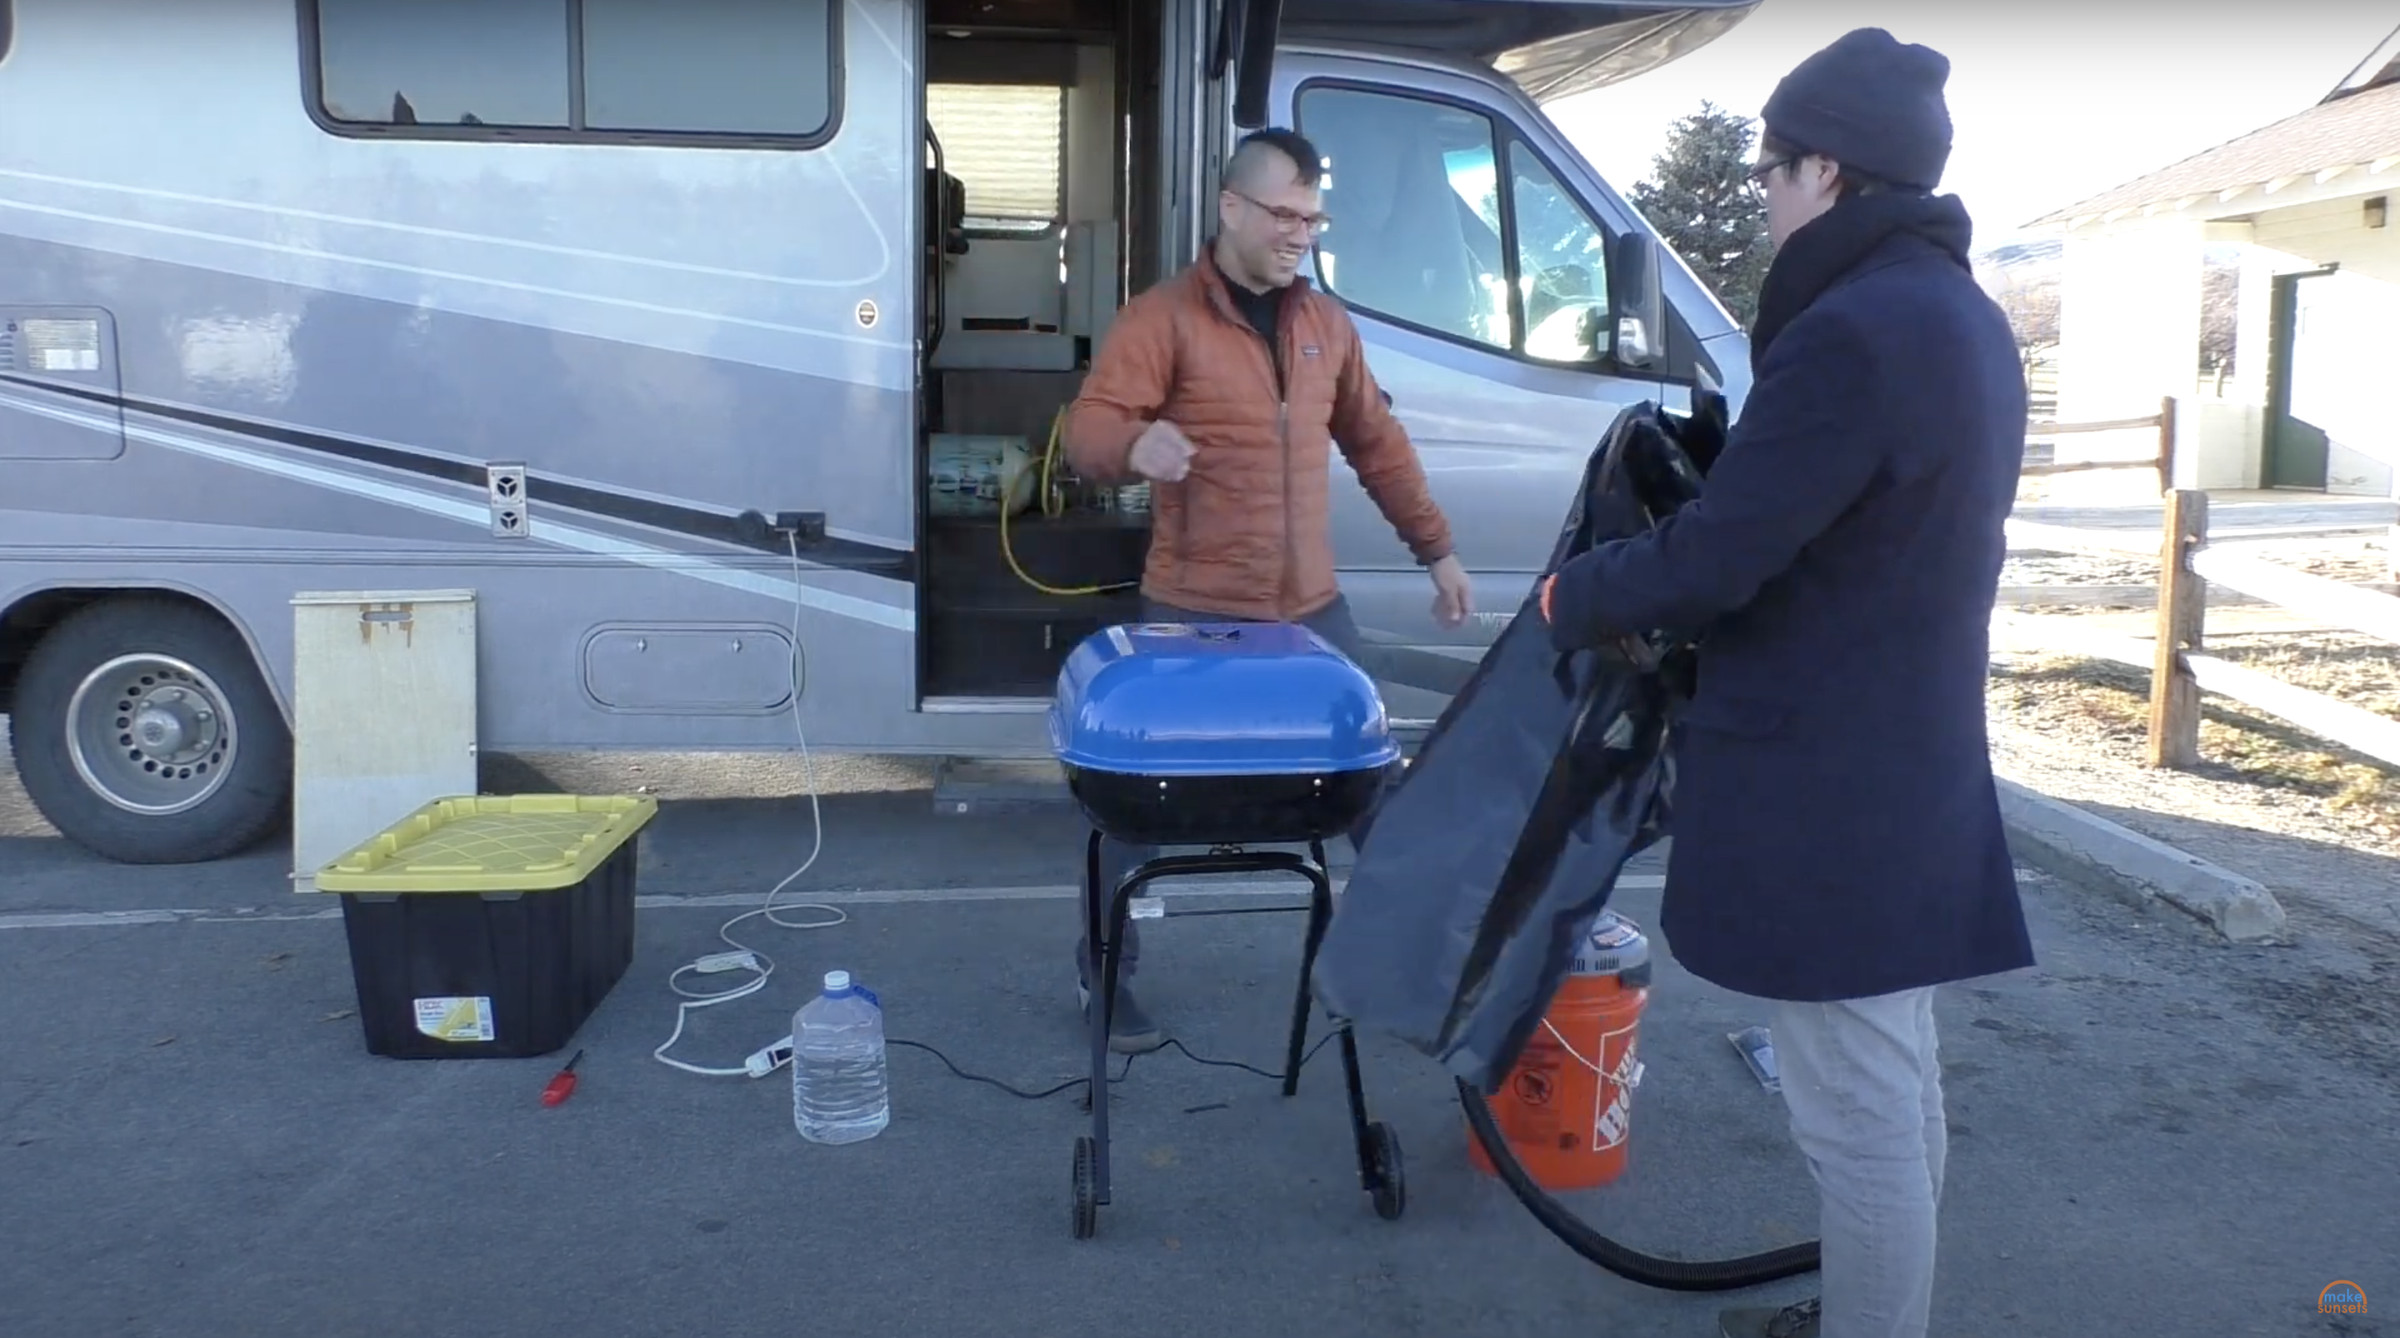 Two guys stand in a parking lot with a small blue charcoal grill between them.